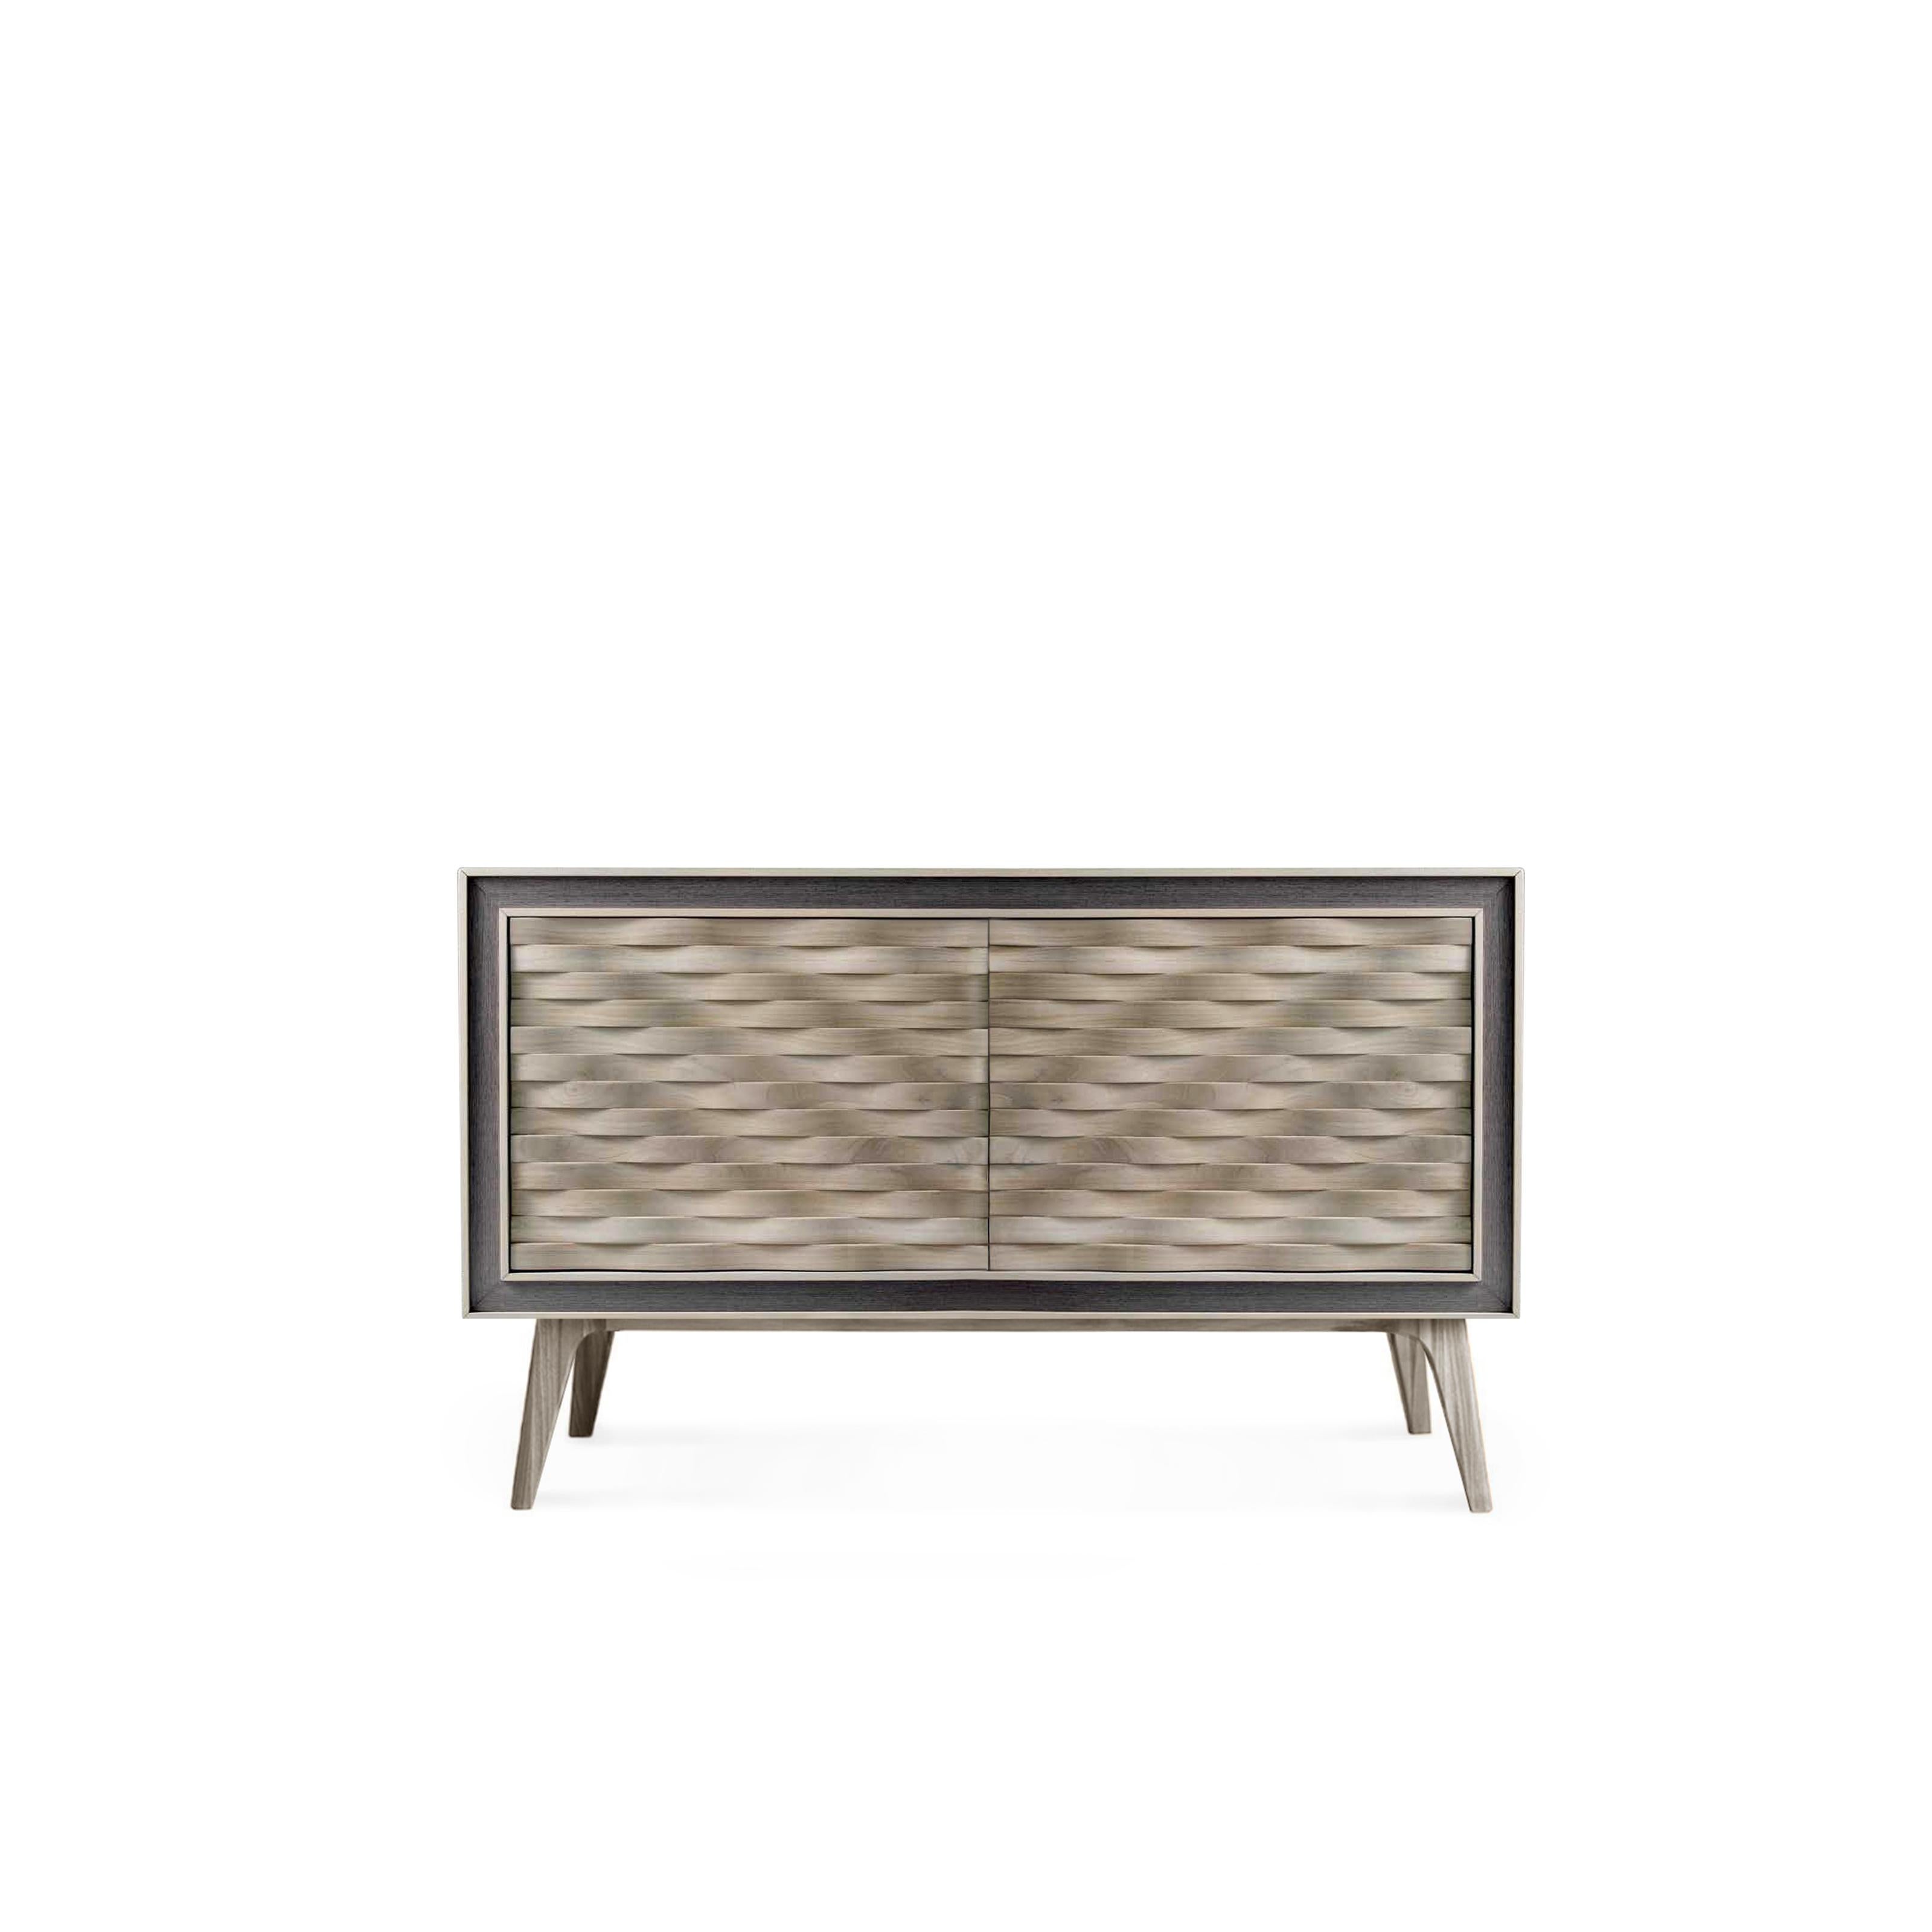 Italian Quadra Nastro Solid Wood Sideboard, Walnut in Natural Grey Finish, Contemporary For Sale